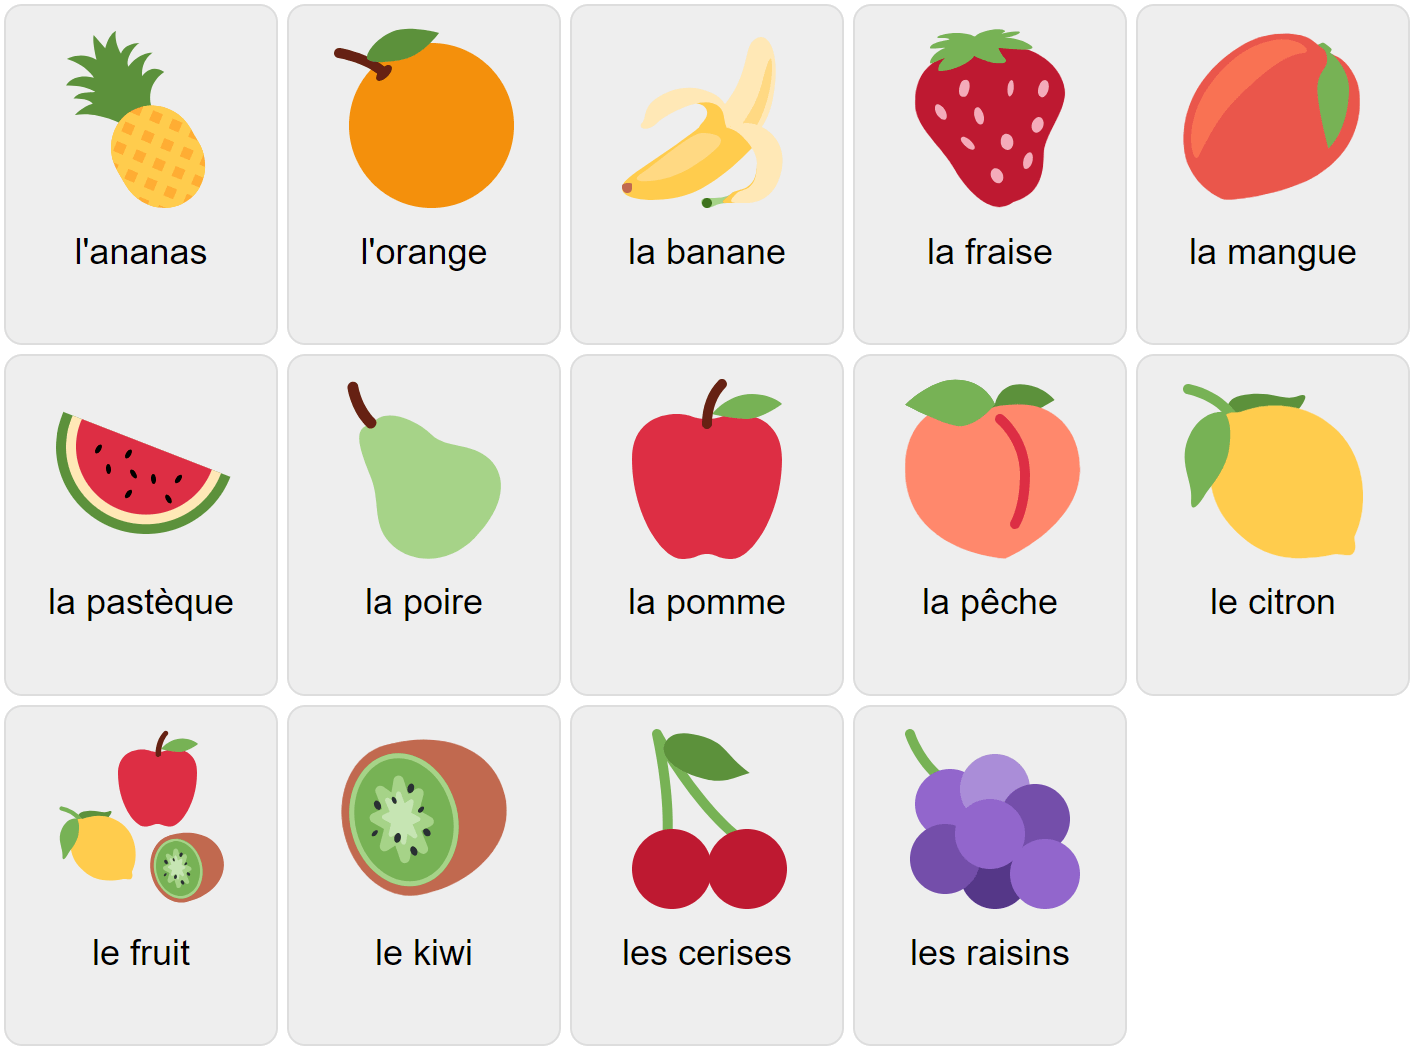 Fruits in French